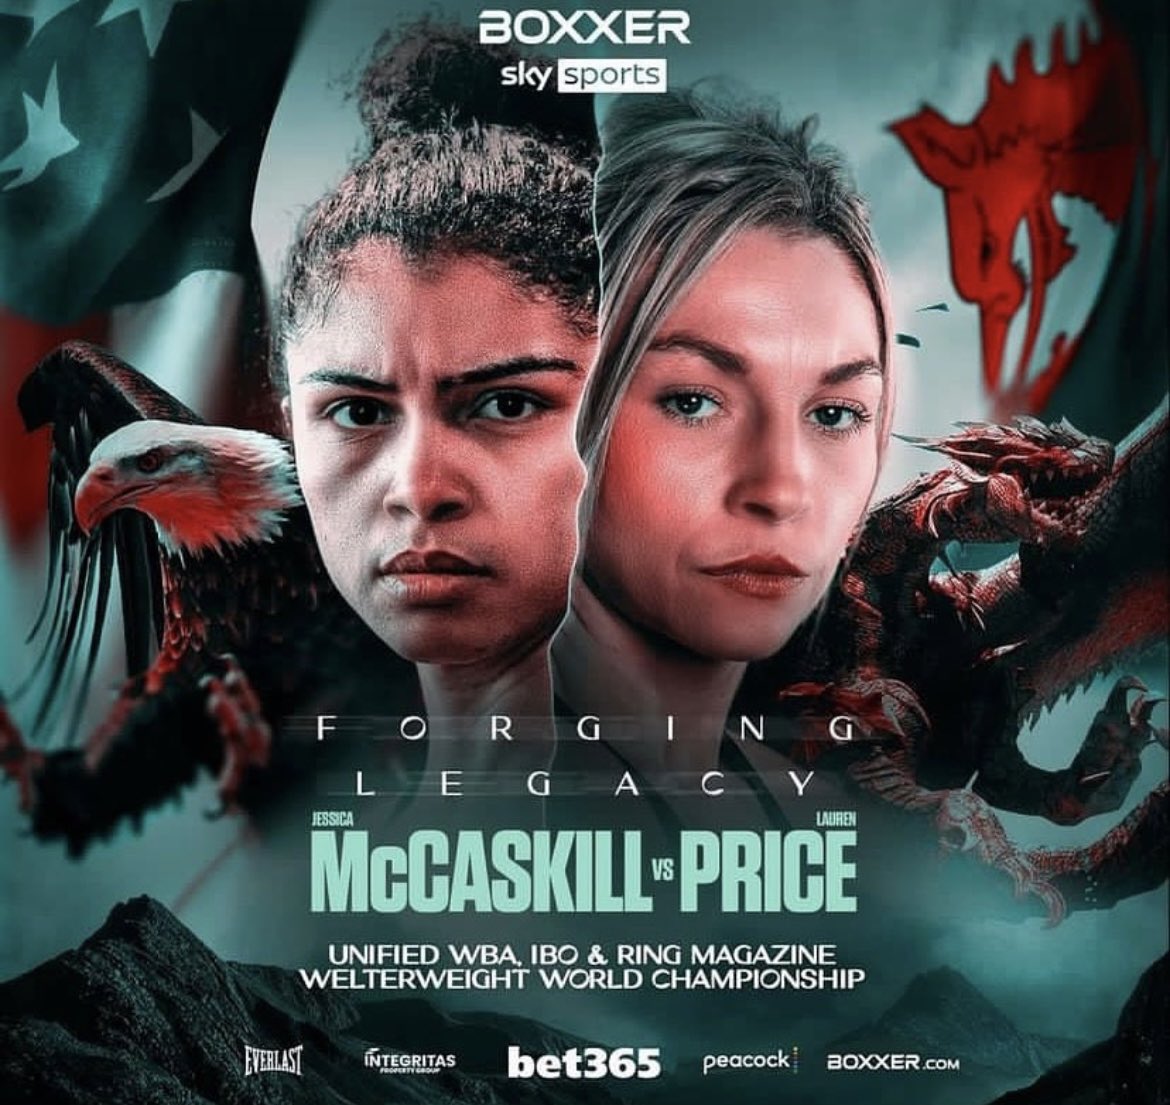 Lauren Price (6-0, 1 ko) will win against Jessica McCaskill (12-3-1, 5 ko’s) the WBA welterweight champion. The Welsh Dragoness is the British welterweight champ, 2020 Olympic gold medalist, 2019 world amateur champion as well #PriceMccaskill #Boxing #boxe #womenboxing #boxeo